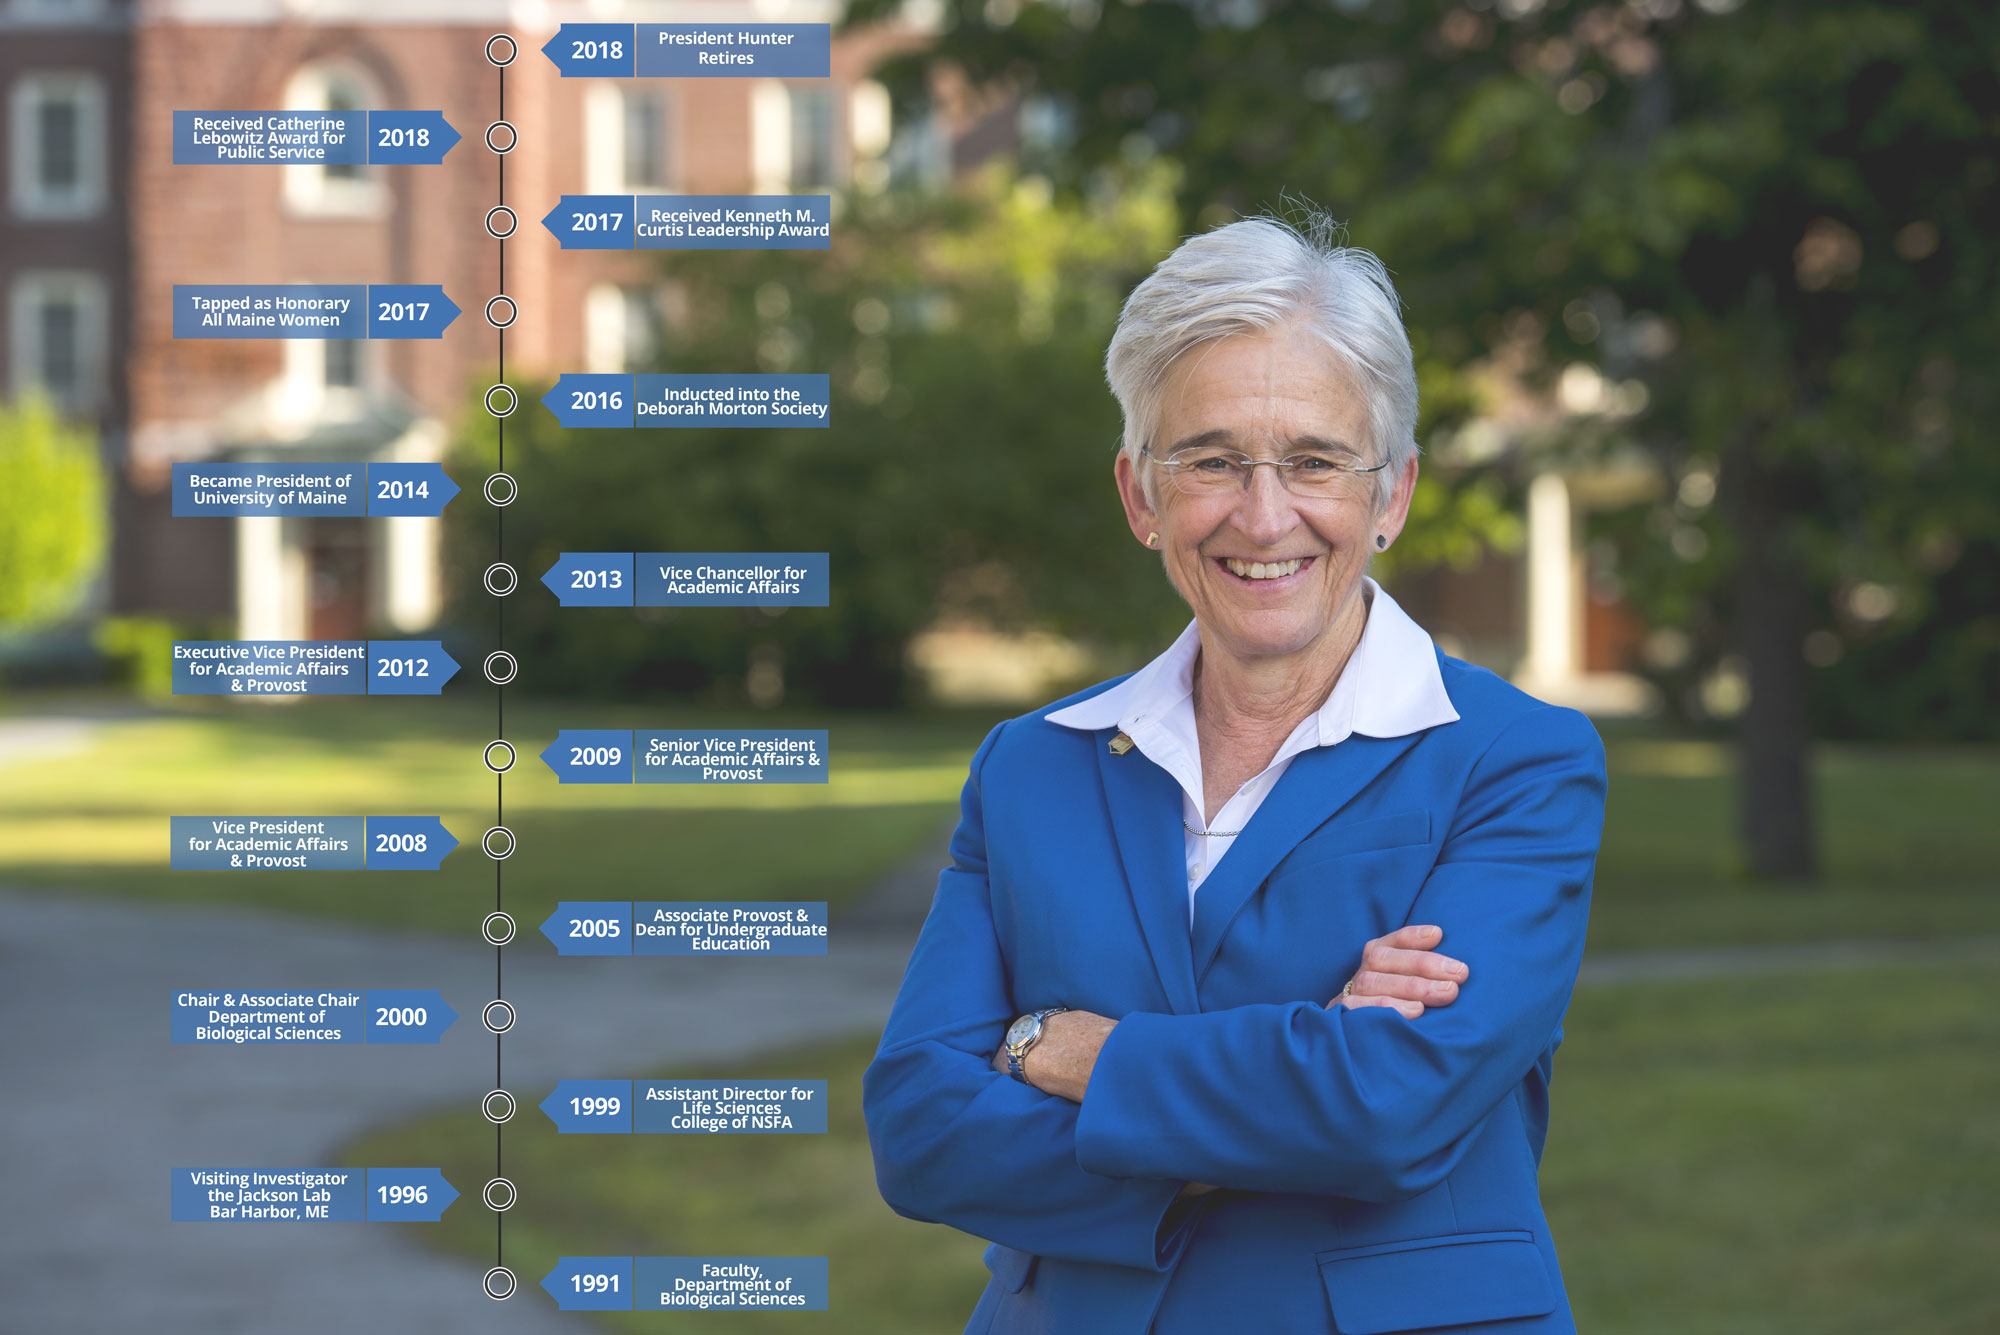 Timeline of Susan Hunter's Time at the University of Maine